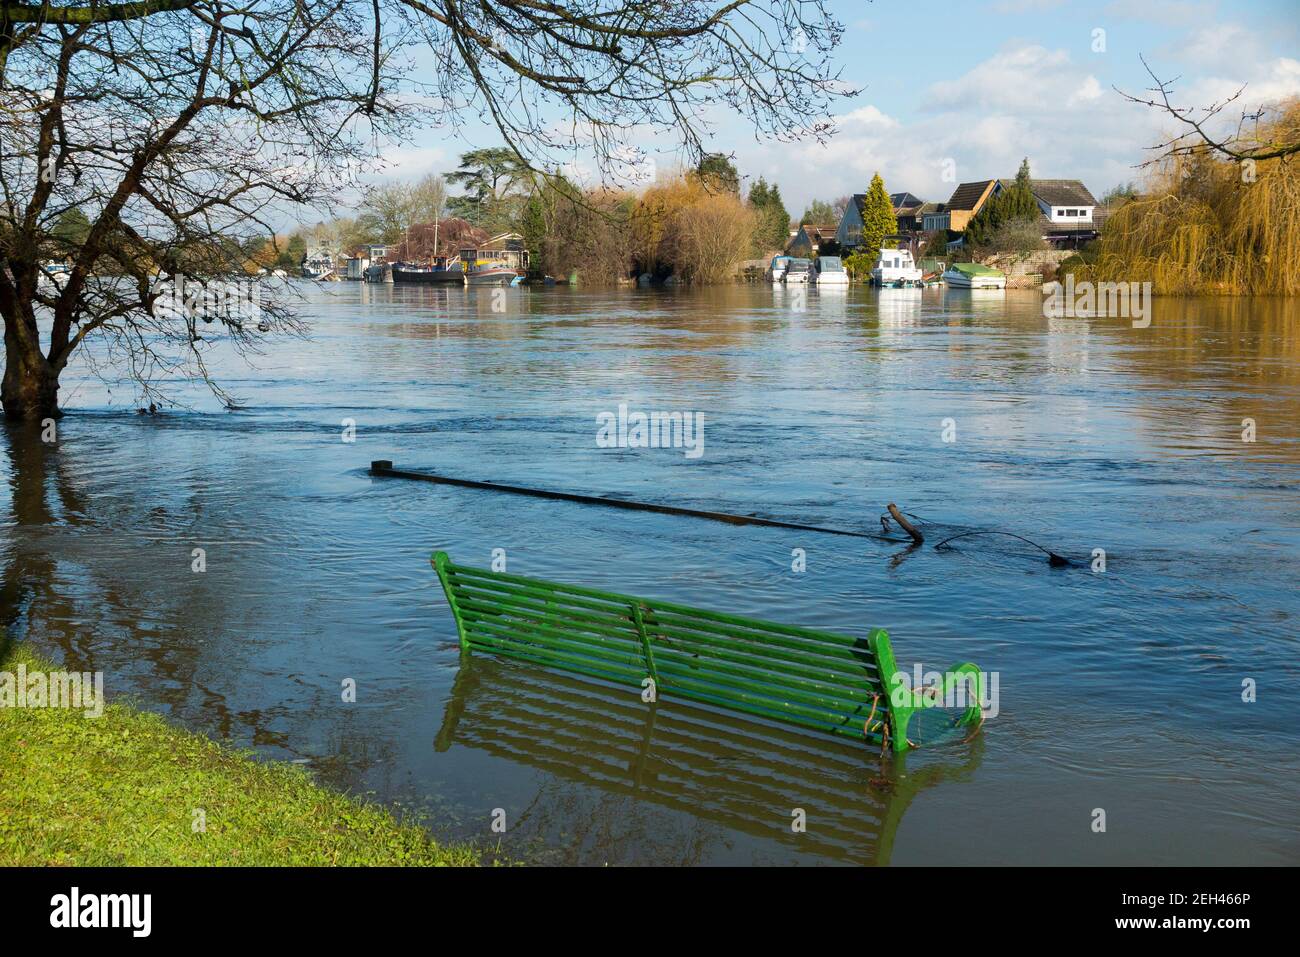 A partially submerged park bench seat in flood waters of the river Thames in old Windsor near Runnymede meadows & flood plain, site of the the signing of the Magna Carta in the year 1215 by King John and the English barons. Winter day with sunny sun and blue sky skies. (123) Stock Photo